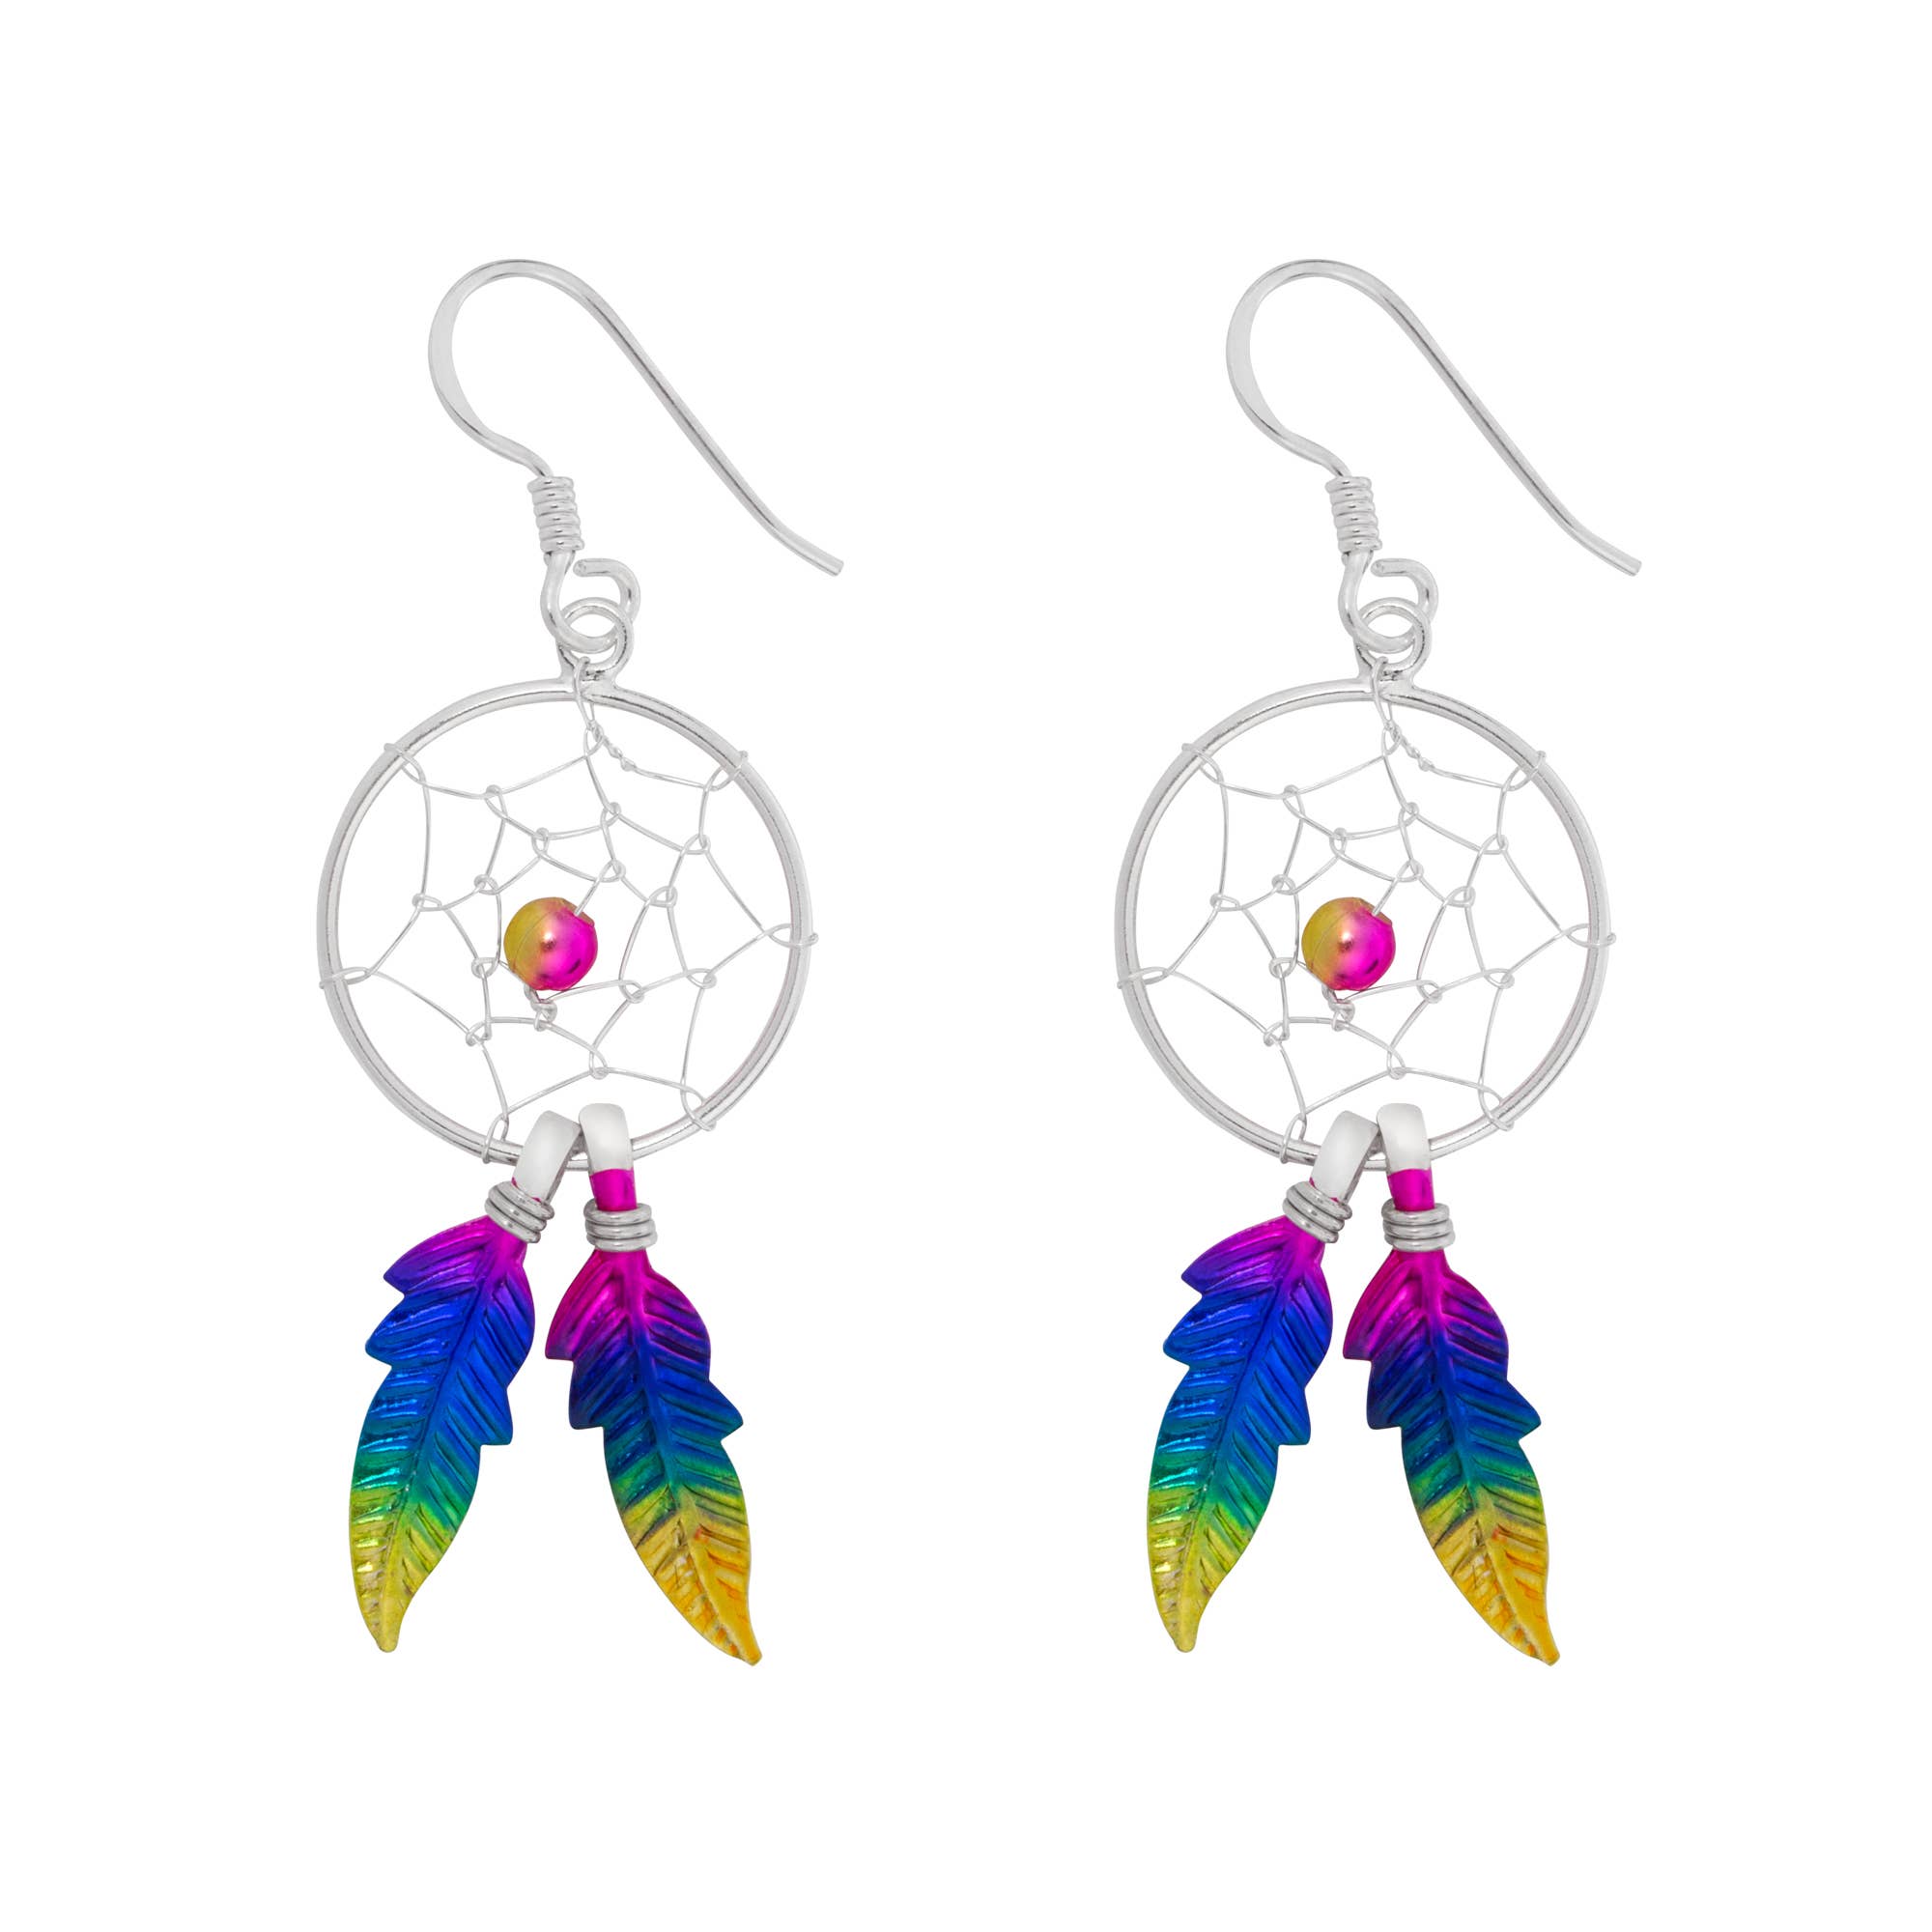 SPIRAL Dream Catcher Earrings w/Dangles Wholesale Lot of 5 Different 